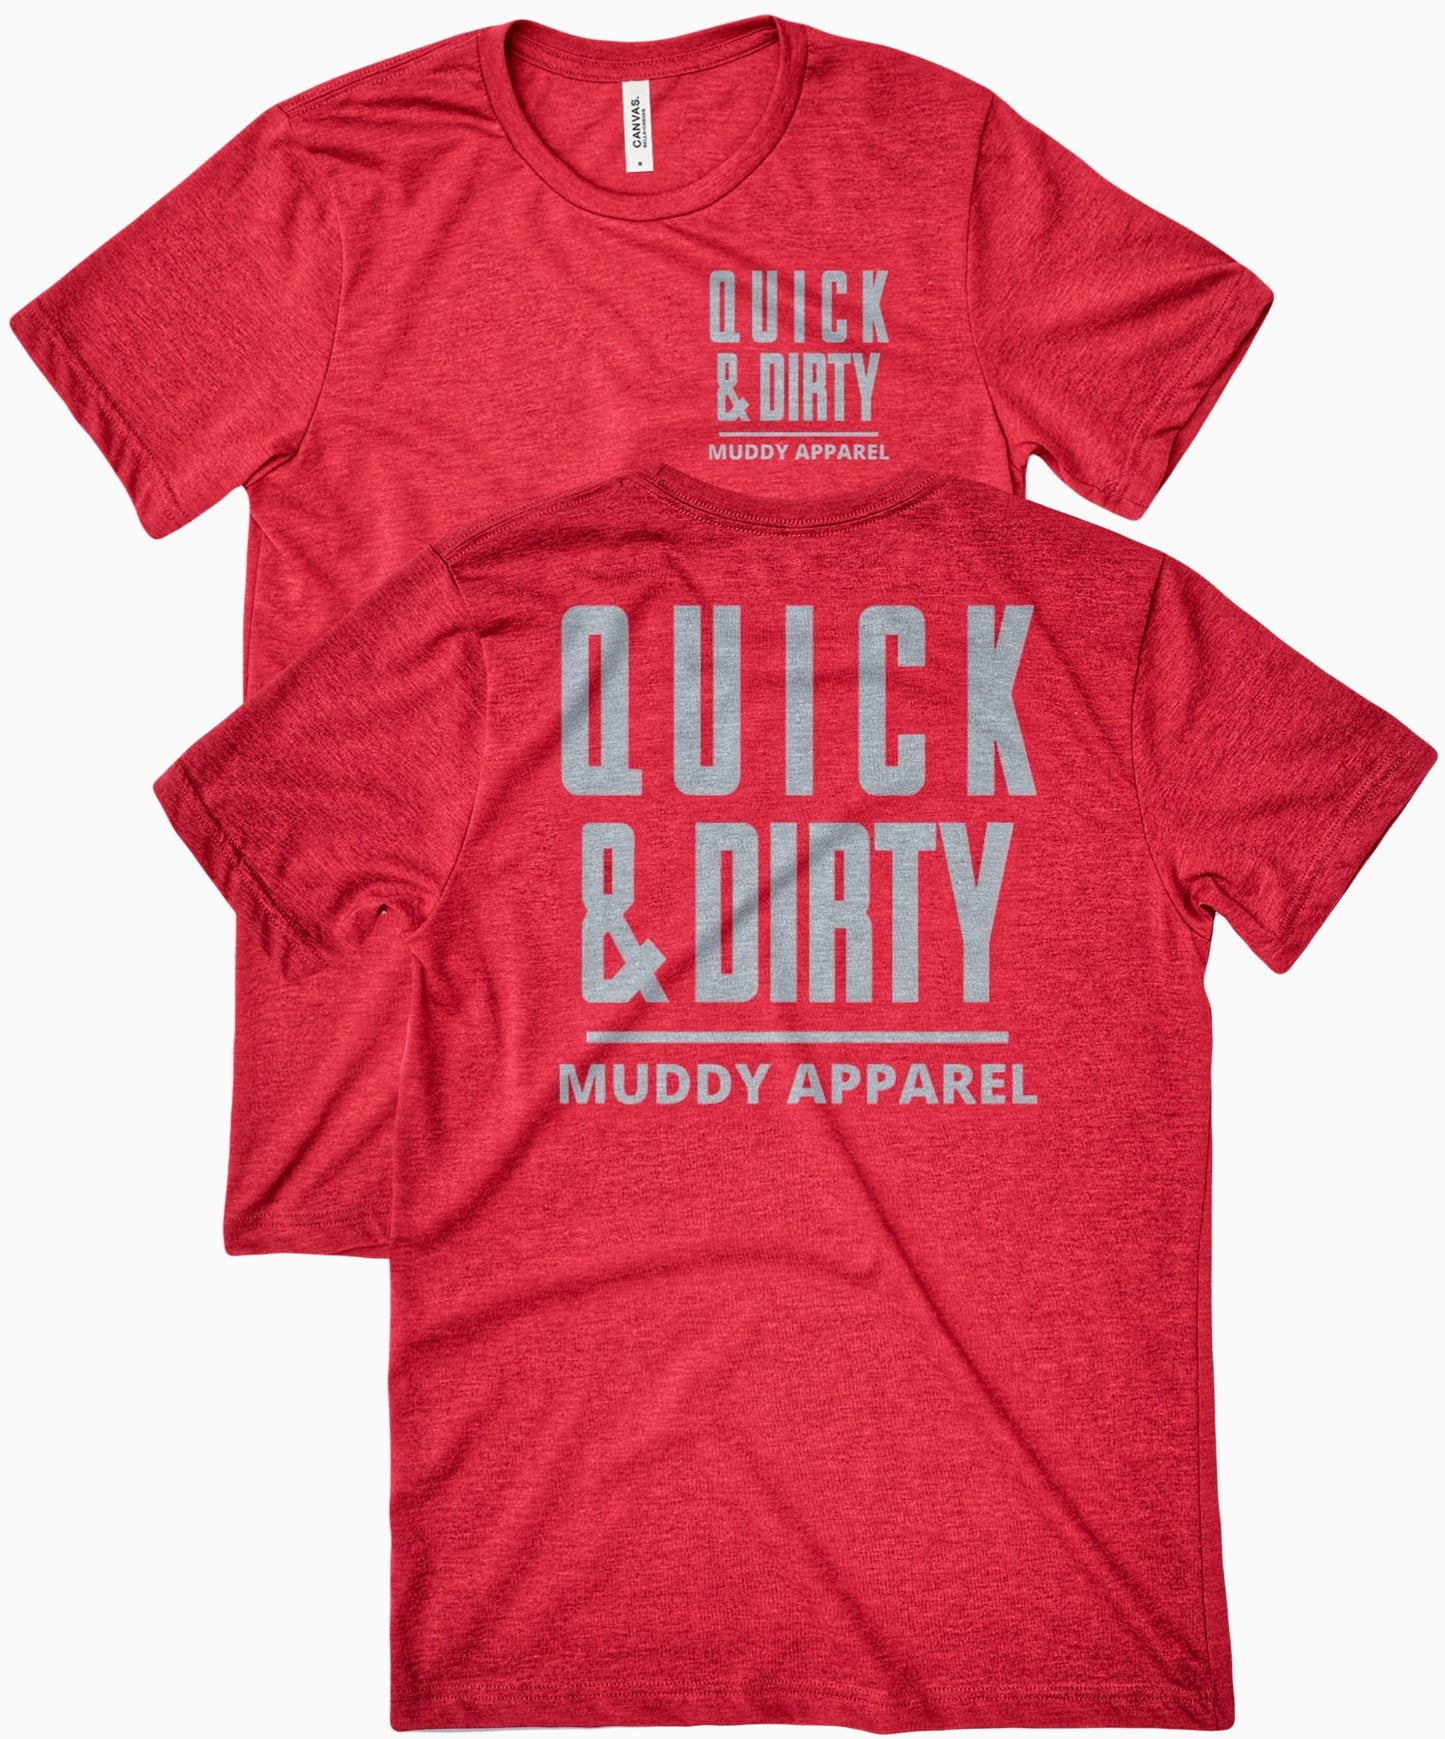 NEW!!! QUICK & DIRTY - HEATHER RED W/ GREY PREMIUM TEE